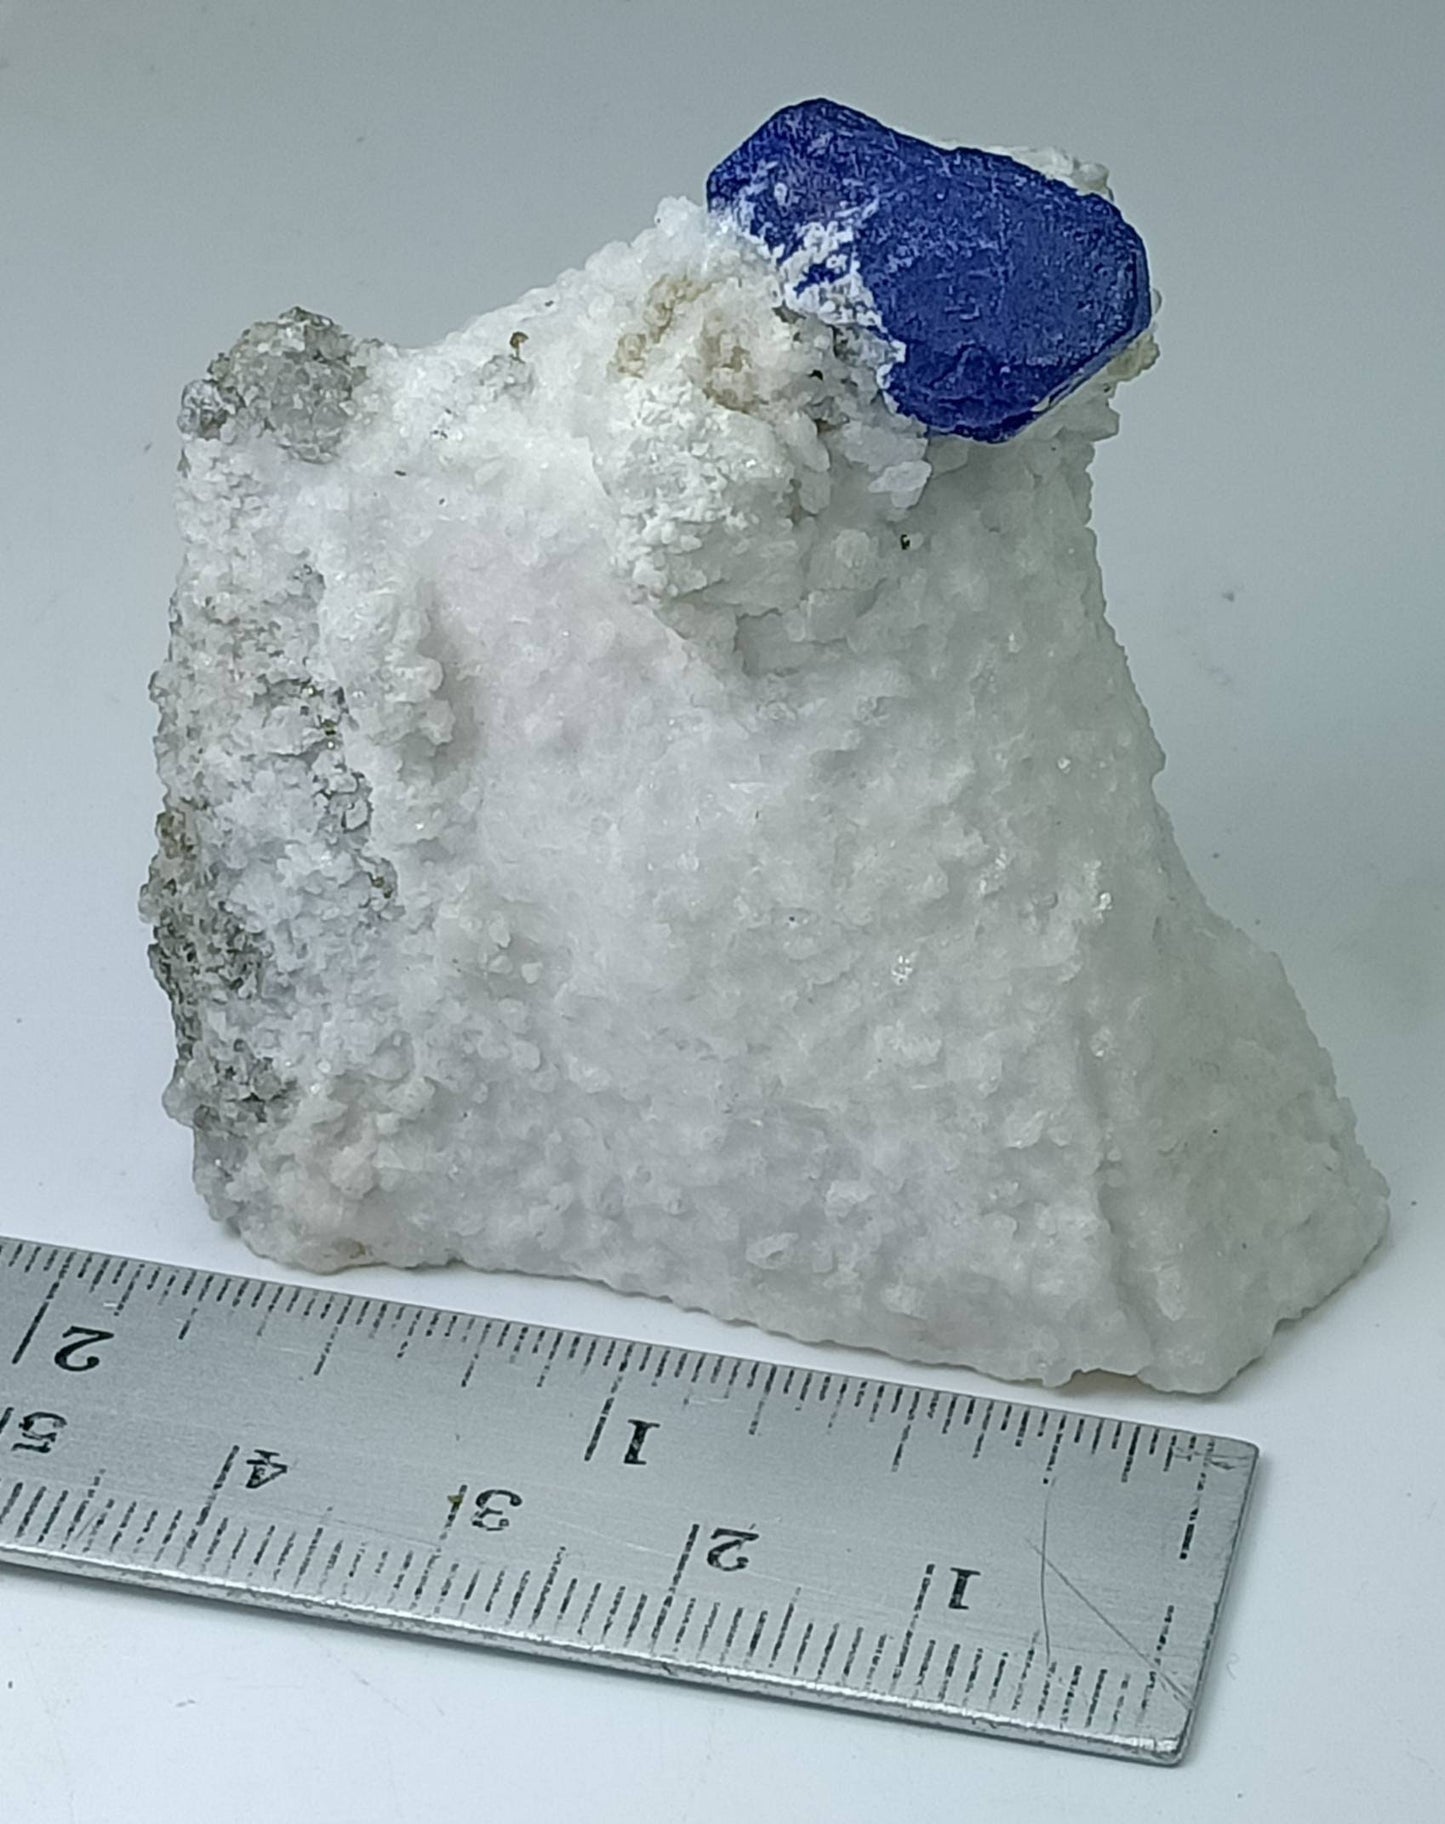 An Aesthetic Specimen of Lazurite on Calcite and Marble